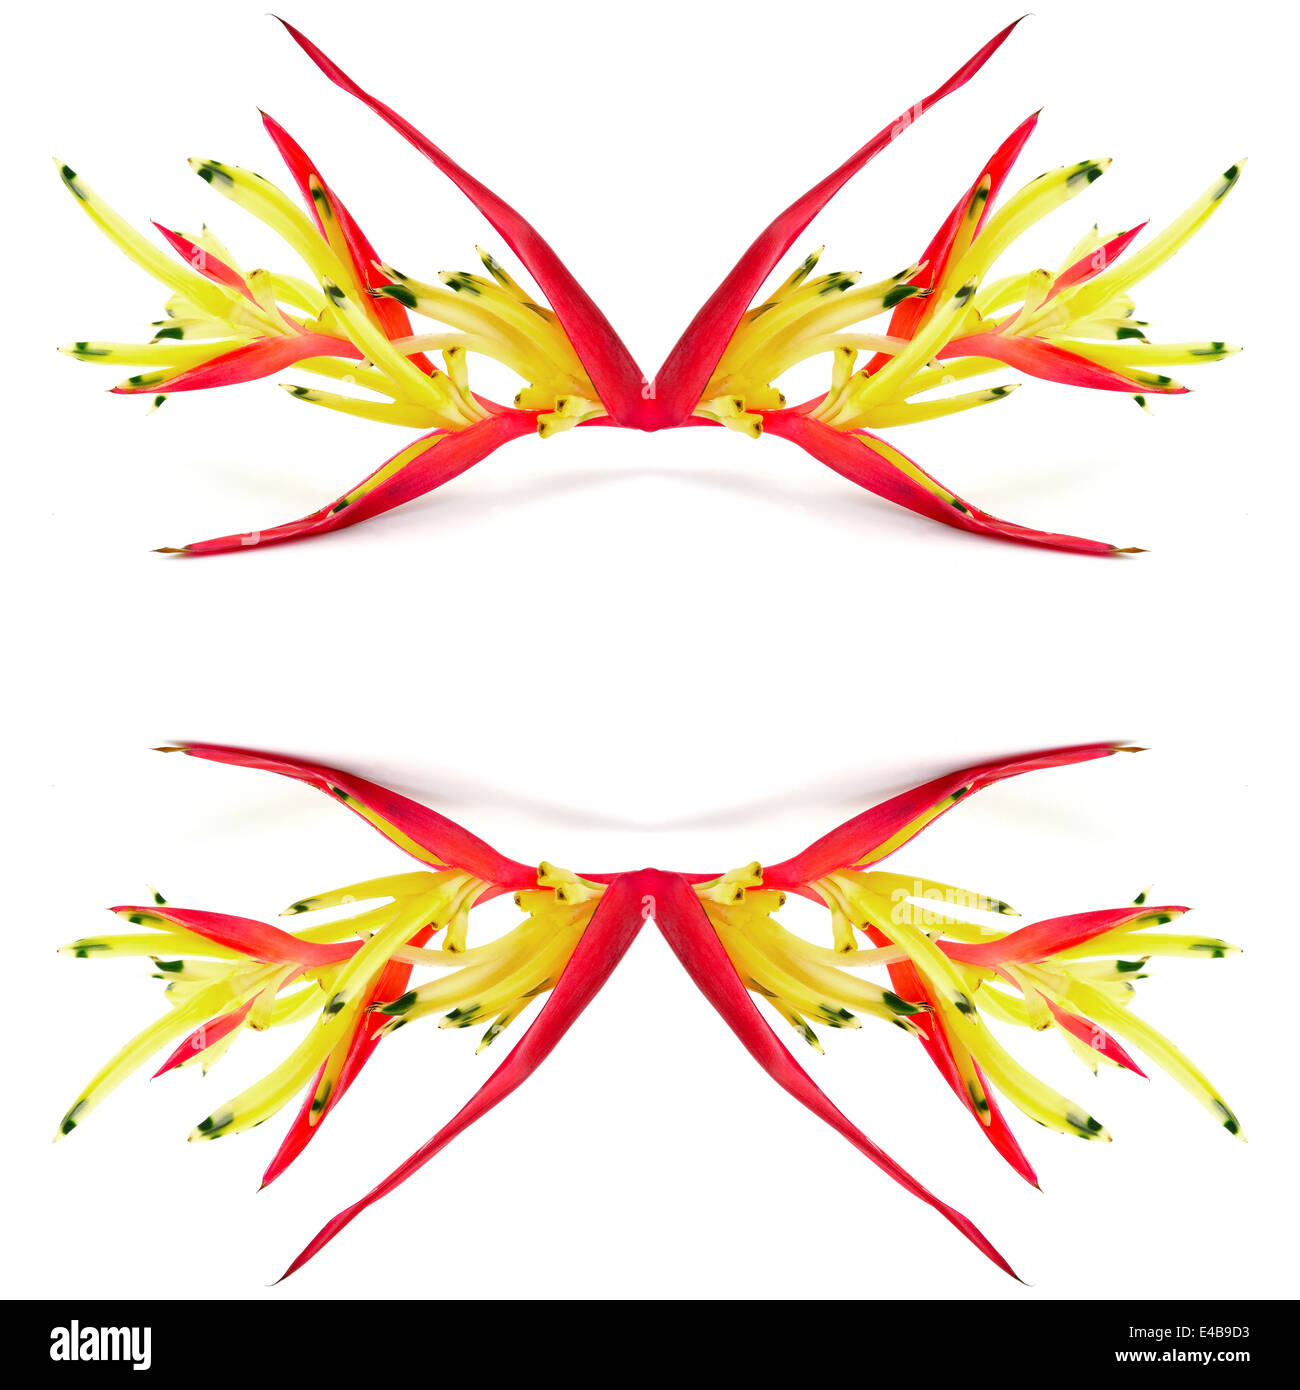 Stalk of a small red heliconia flower, tropical flower, isolated on a white background Stock Photo